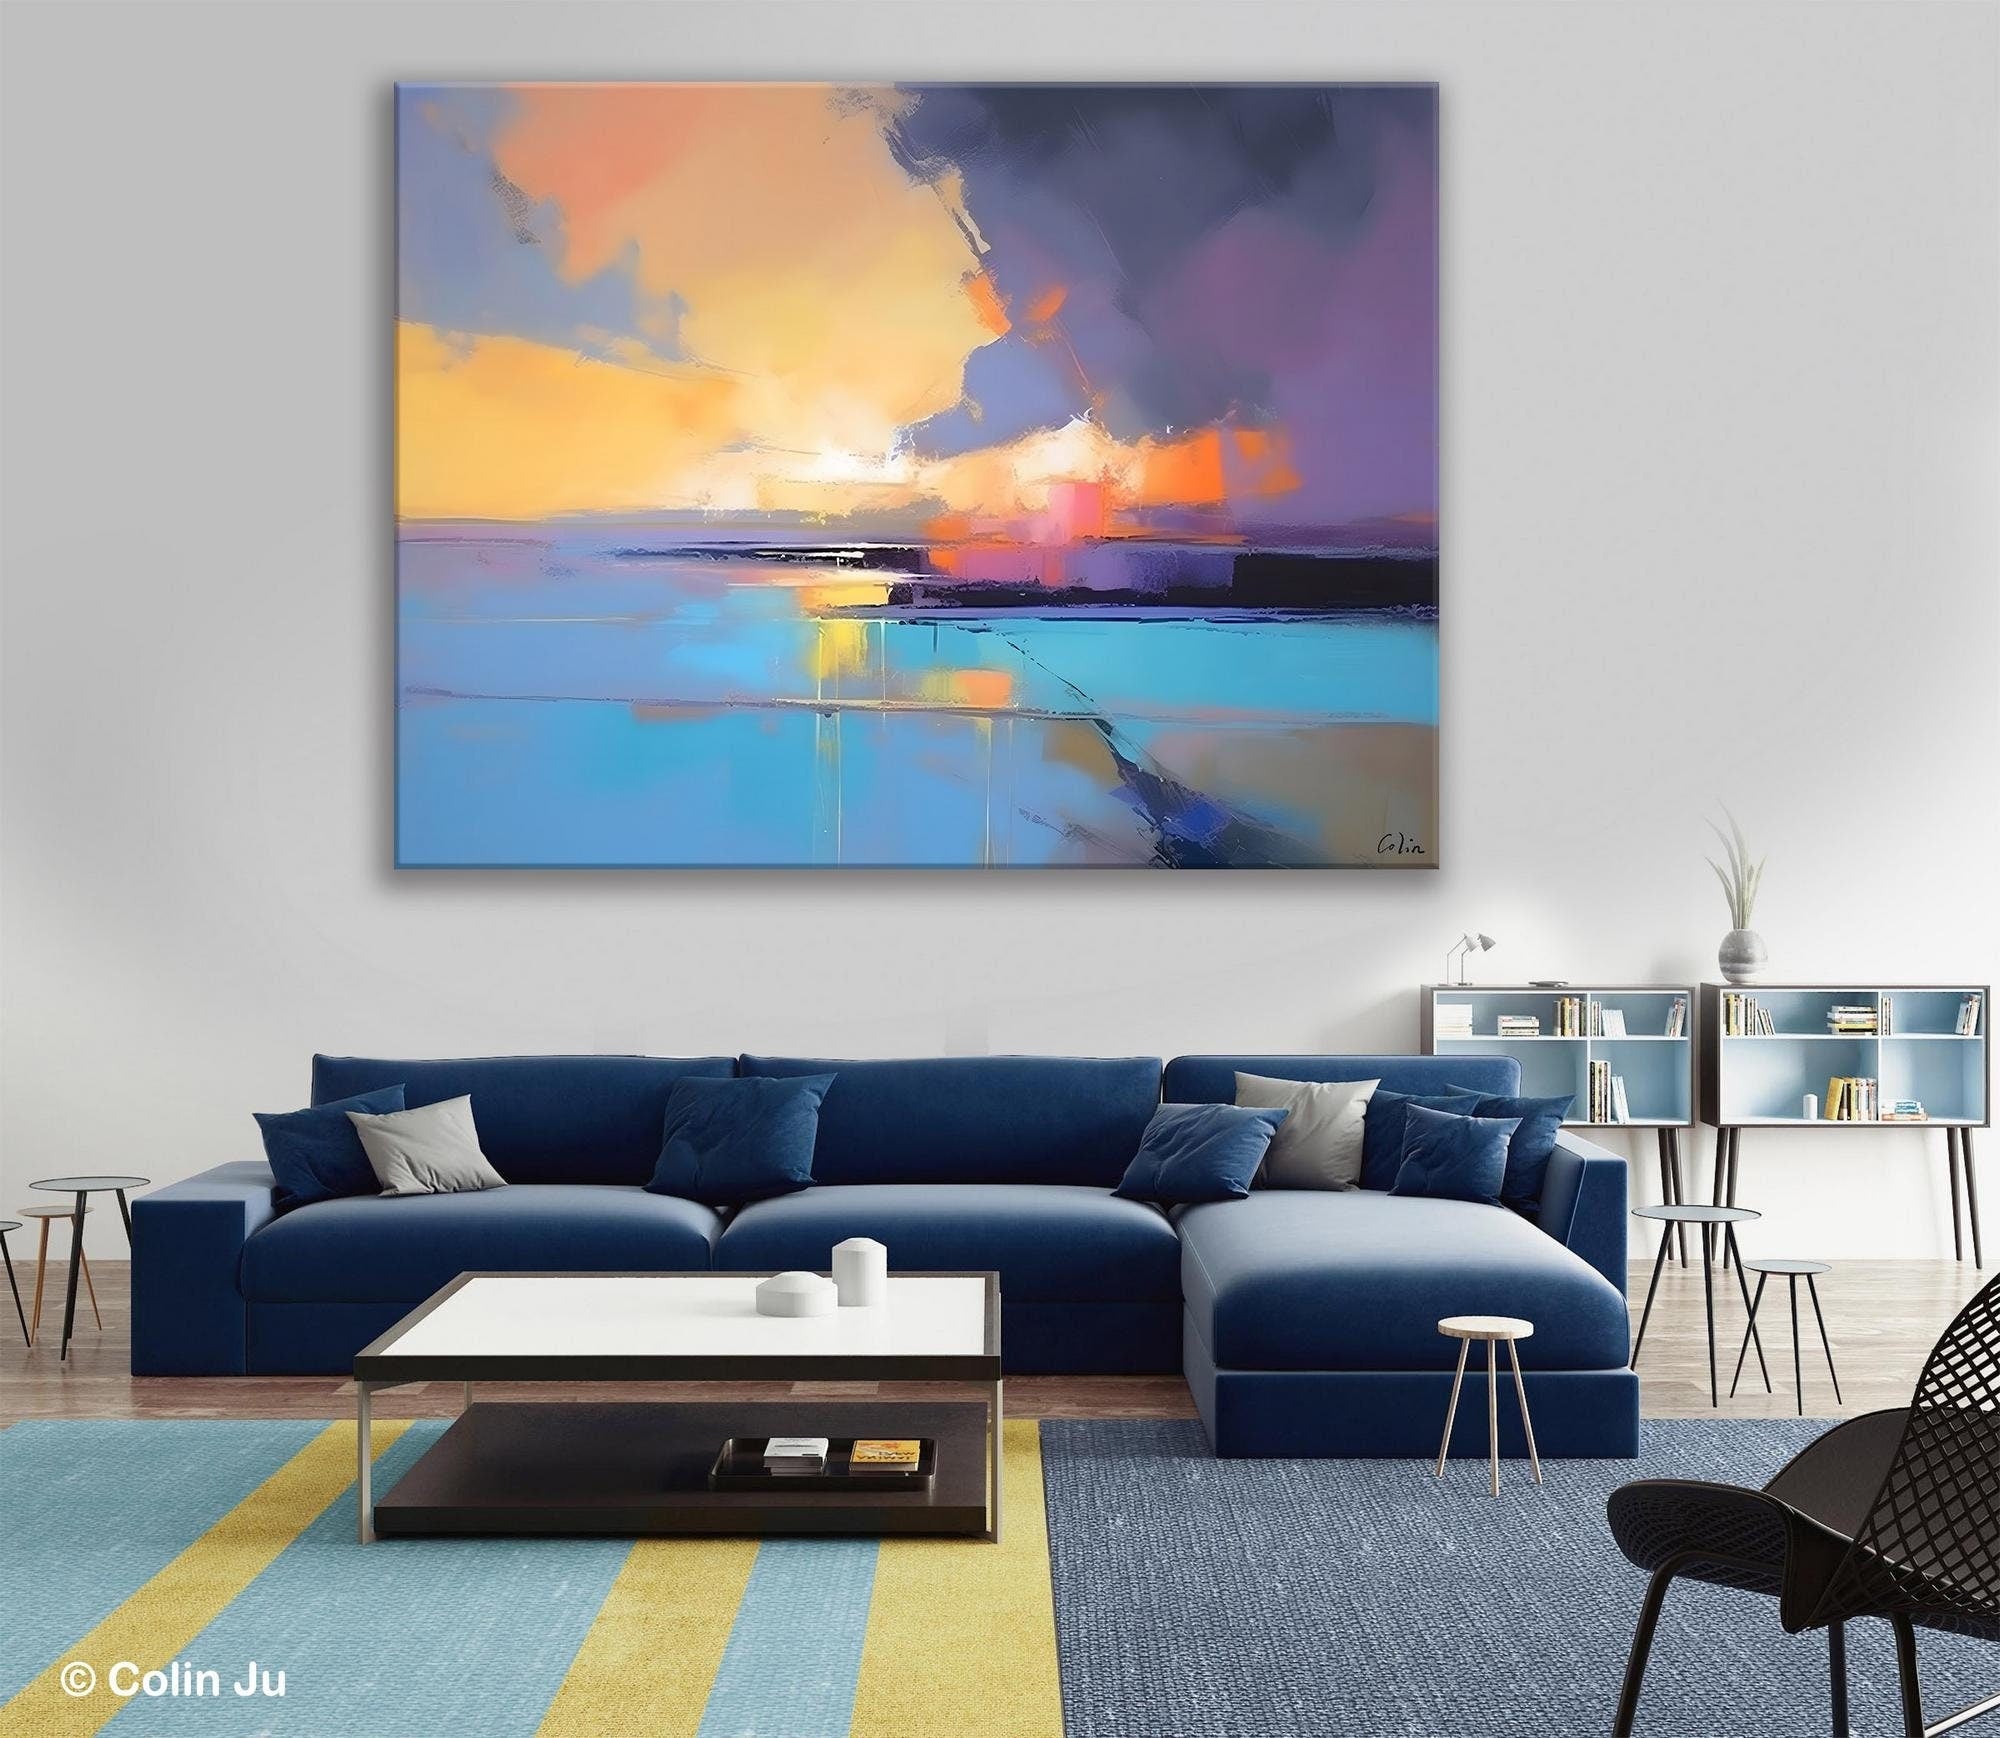 Extra Large Modern Wall Art Paintings, Acrylic Painting on Canvas, Landscape Paintings for Living Room, Original Landscape Abstract Painting-Paintingforhome